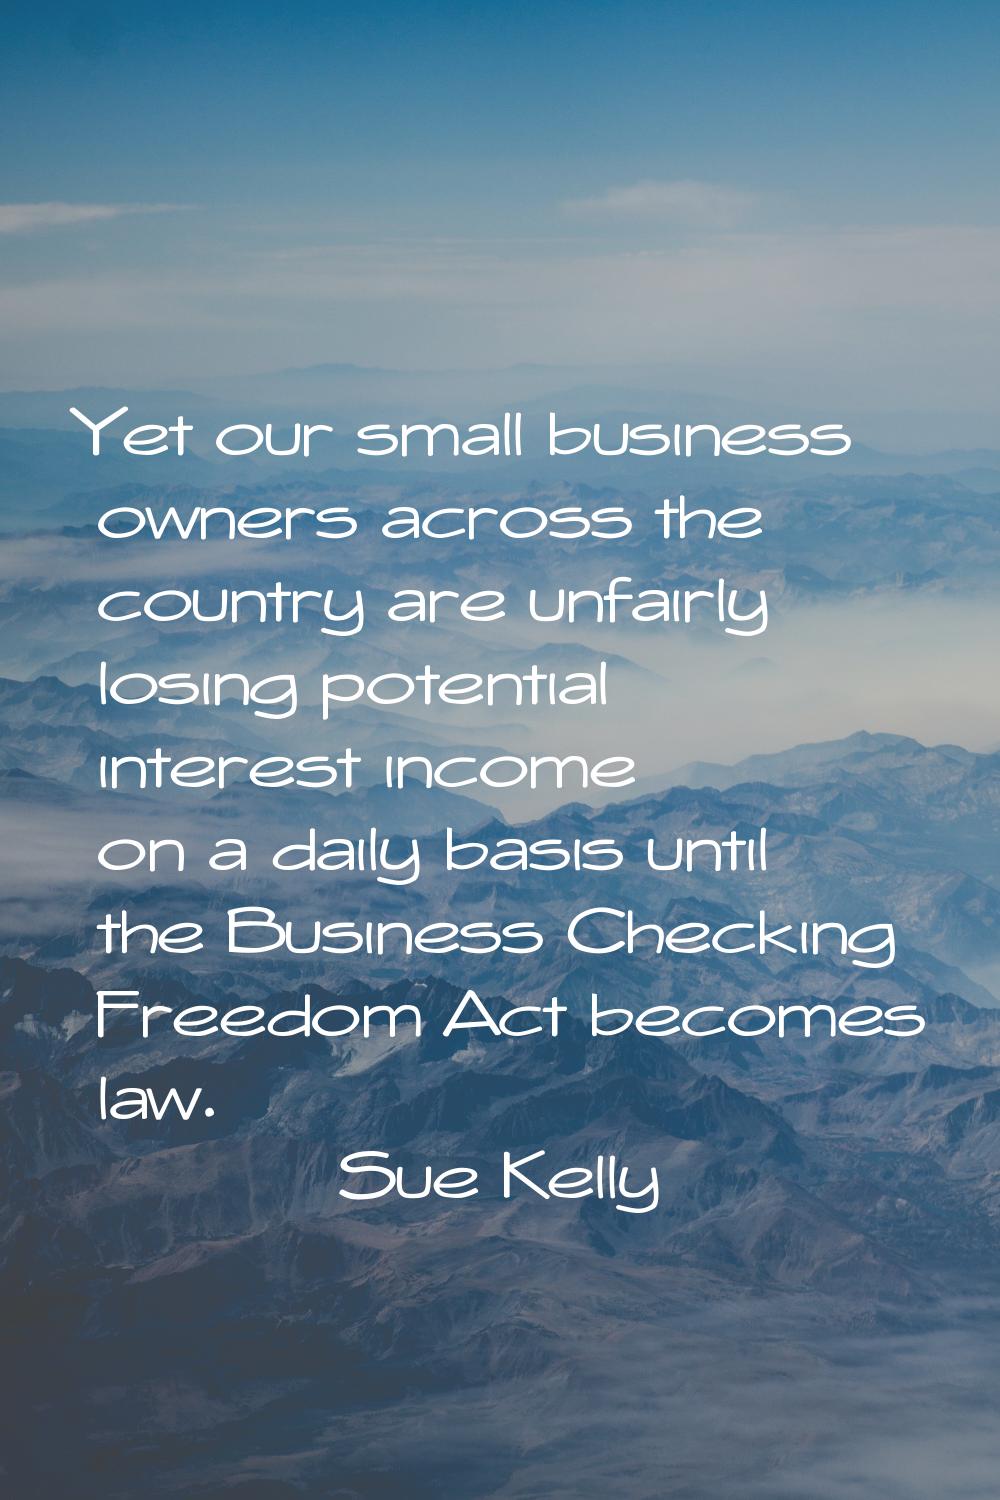 Yet our small business owners across the country are unfairly losing potential interest income on a